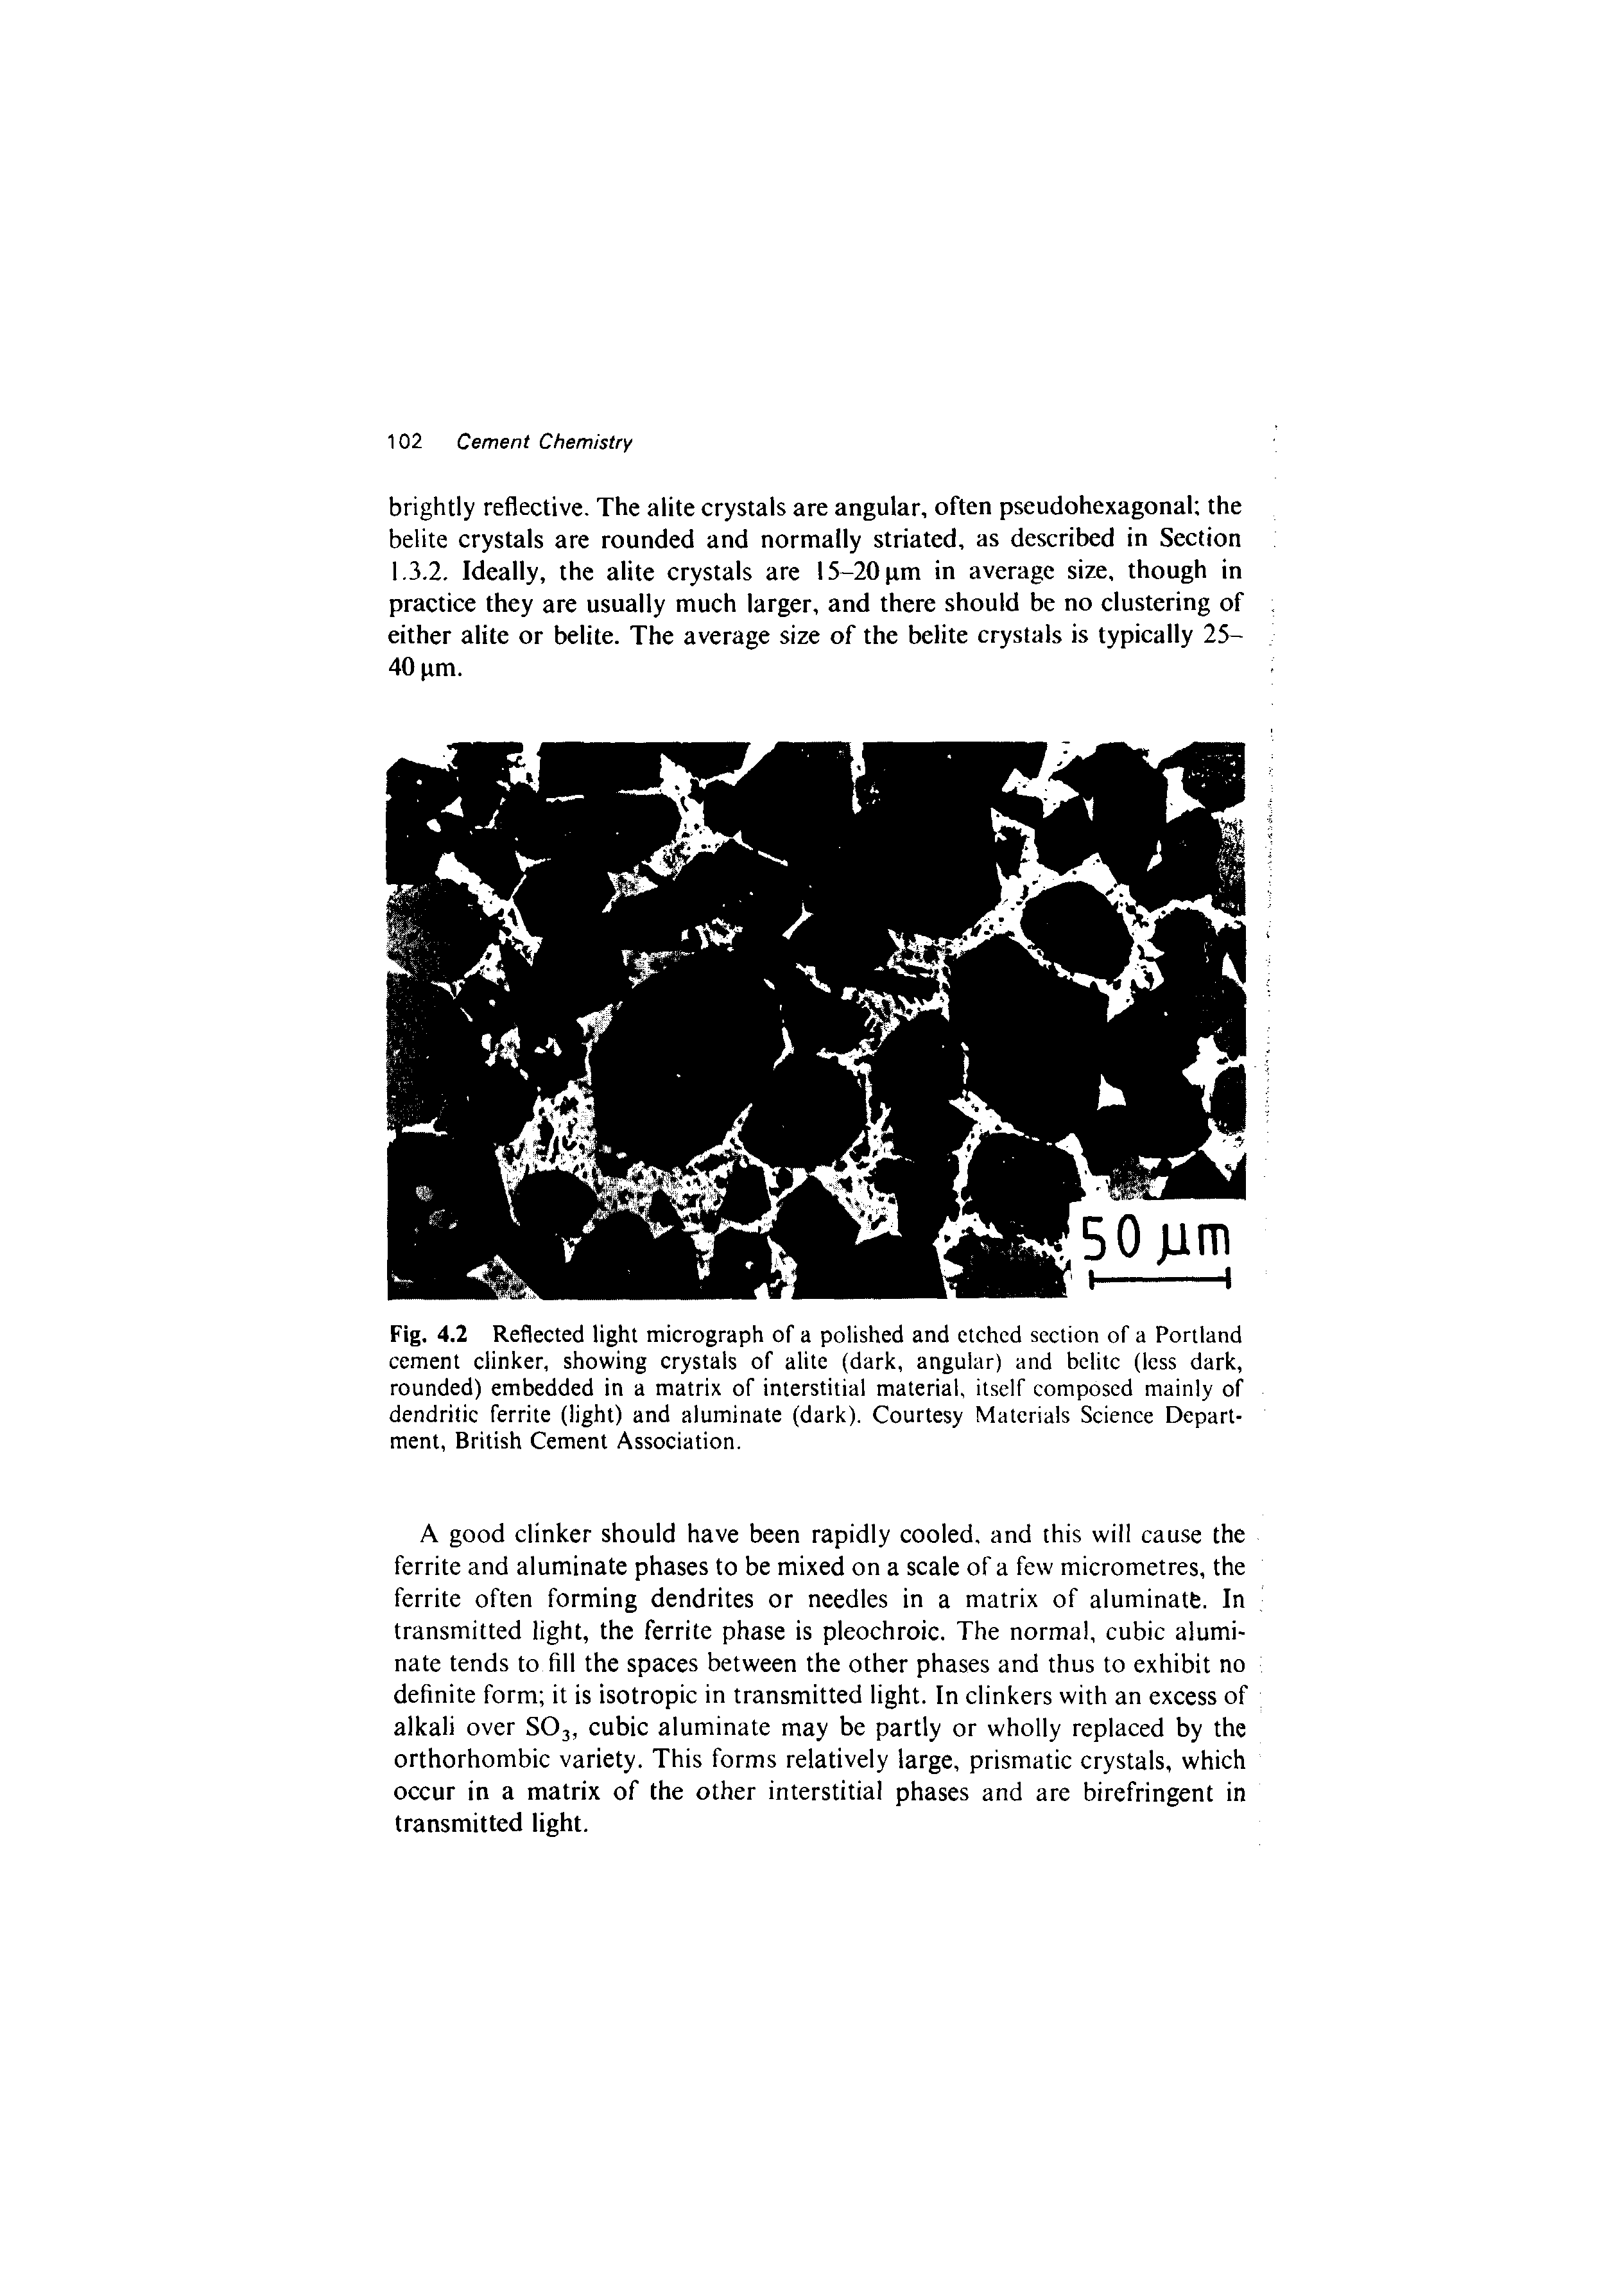 Fig. 4.2 Reflected light micrograph of a polished and etched section of a Portland cement clinker, showing crystals of alite (dark, angular) and belite (less dark, rounded) embedded in a matrix of interstitial material, itself composed mainly of dendritic ferrite (light) and aluminate (dark). Courtesy Materials Science Department, British Cement Association.